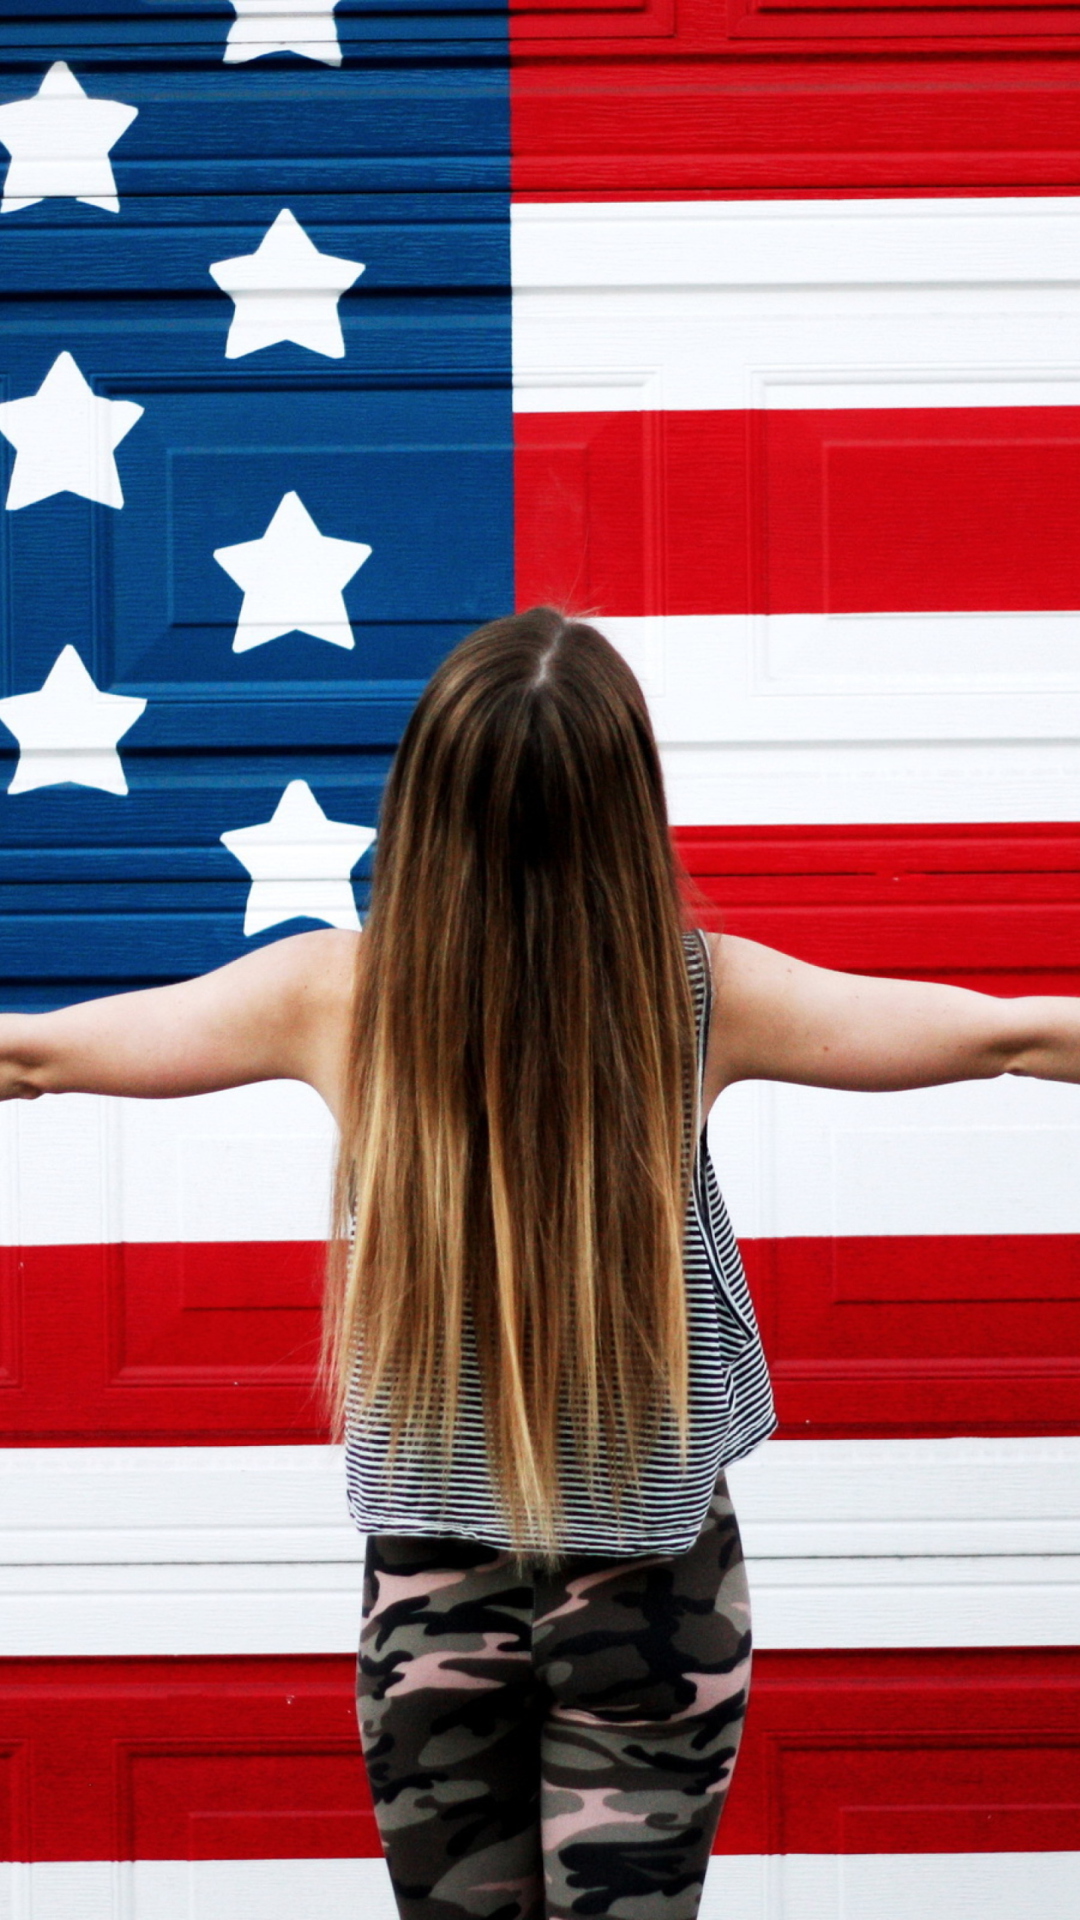 Das American Girl In Front Of USA Flag Wallpaper 1080x1920